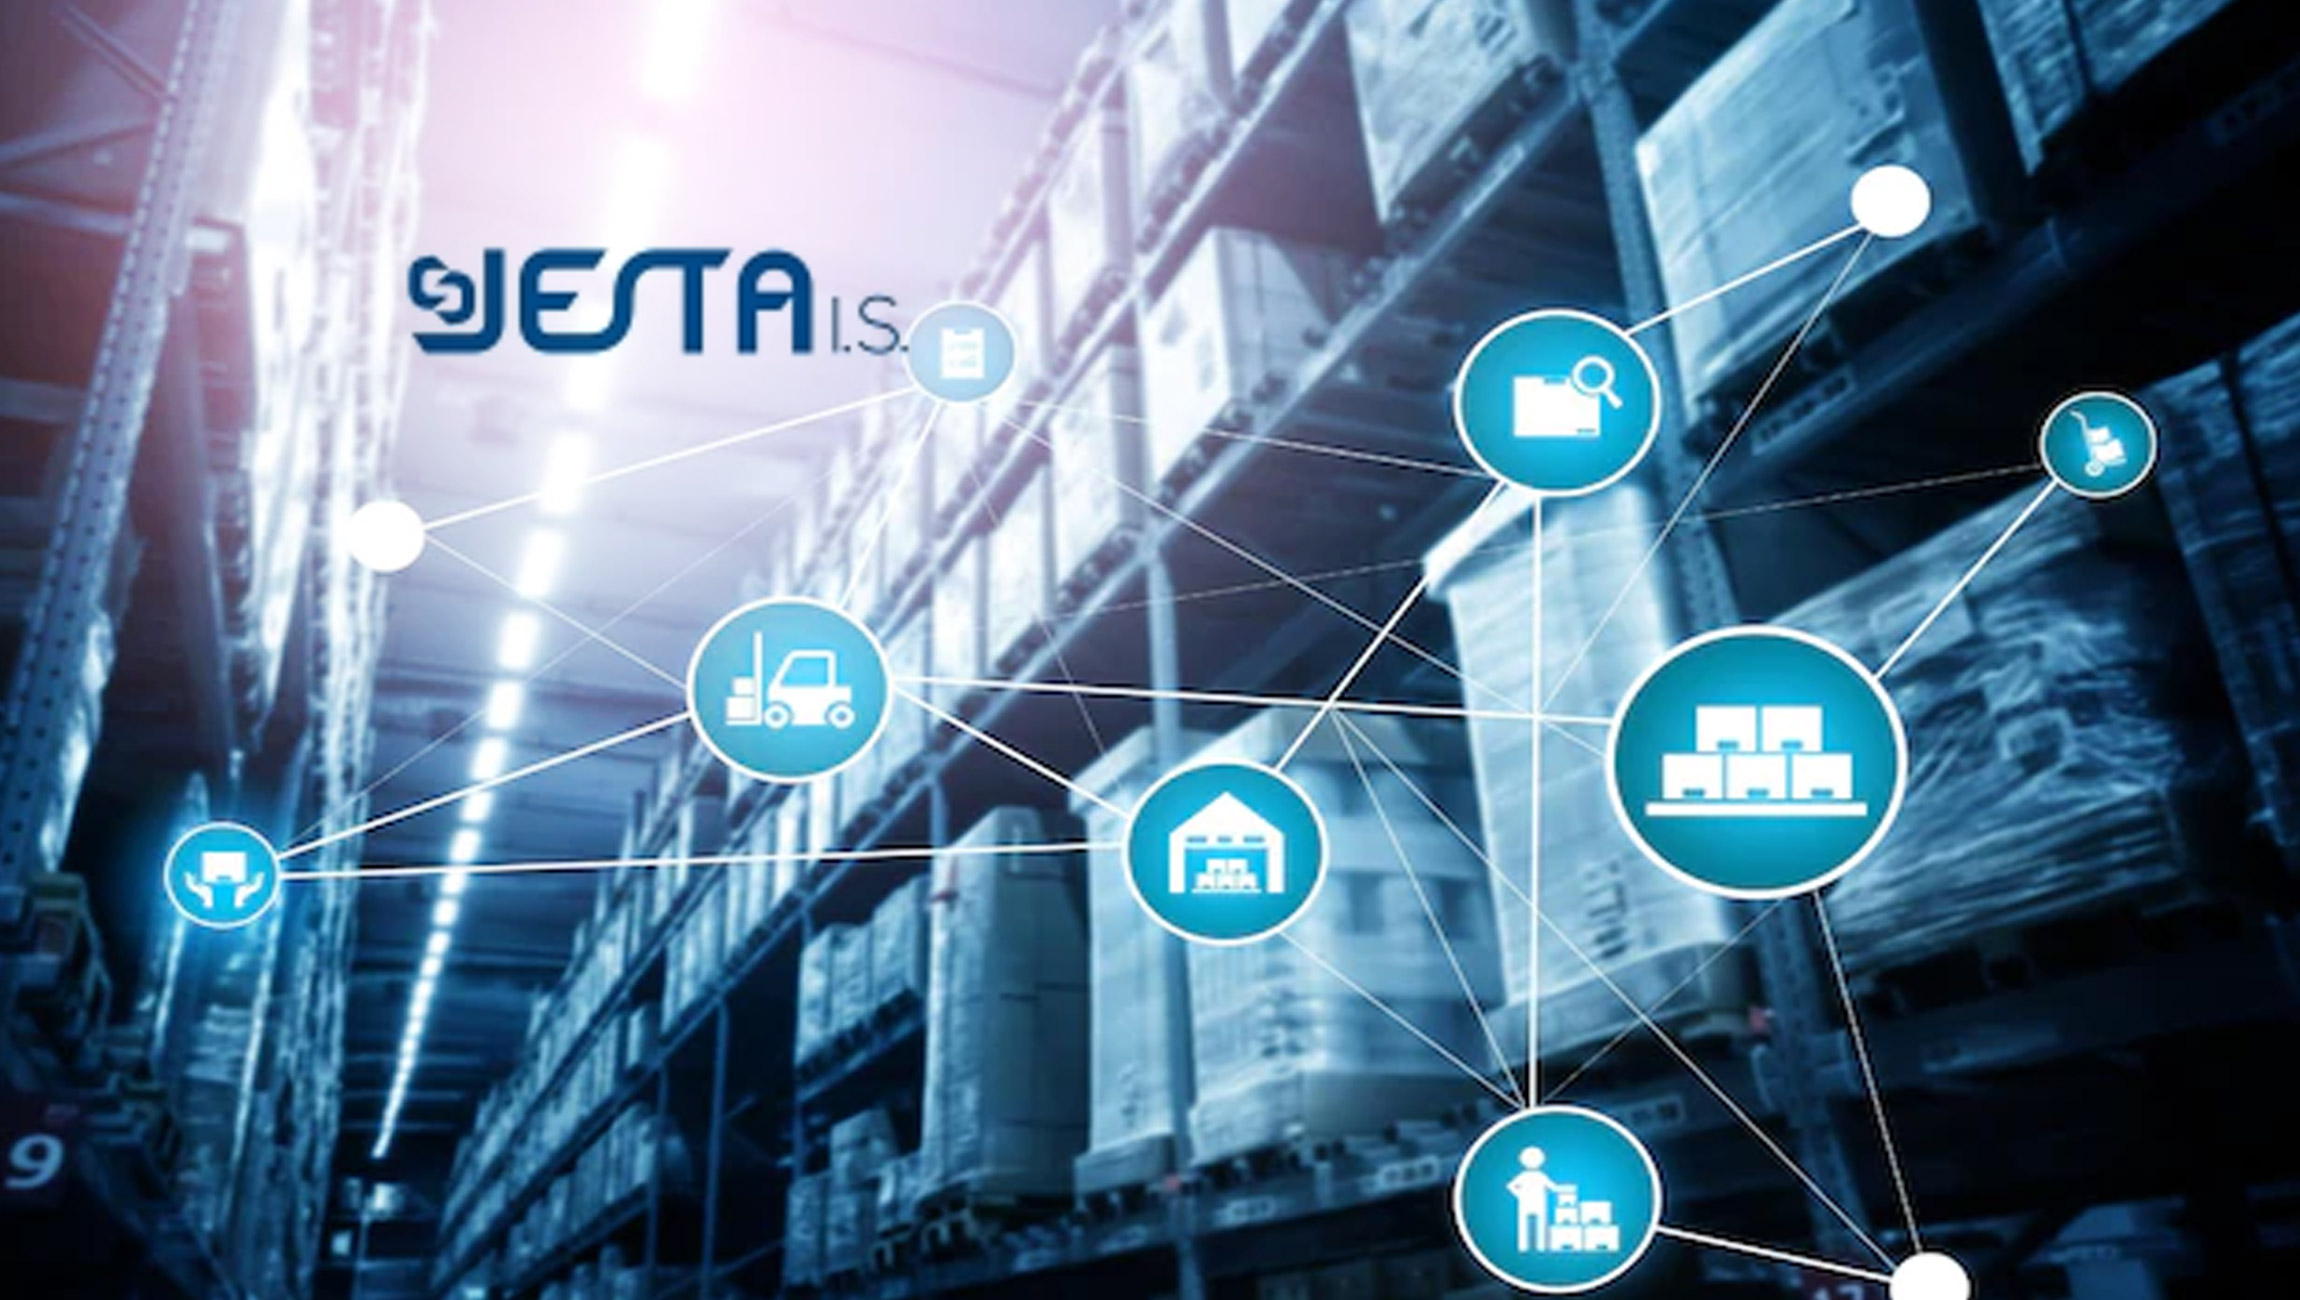 Jesta-I.S.-Launches-Global-Product-Development-and-Procurement-Software-Advancements-to-Tackle-Supply-Chain-Disruption